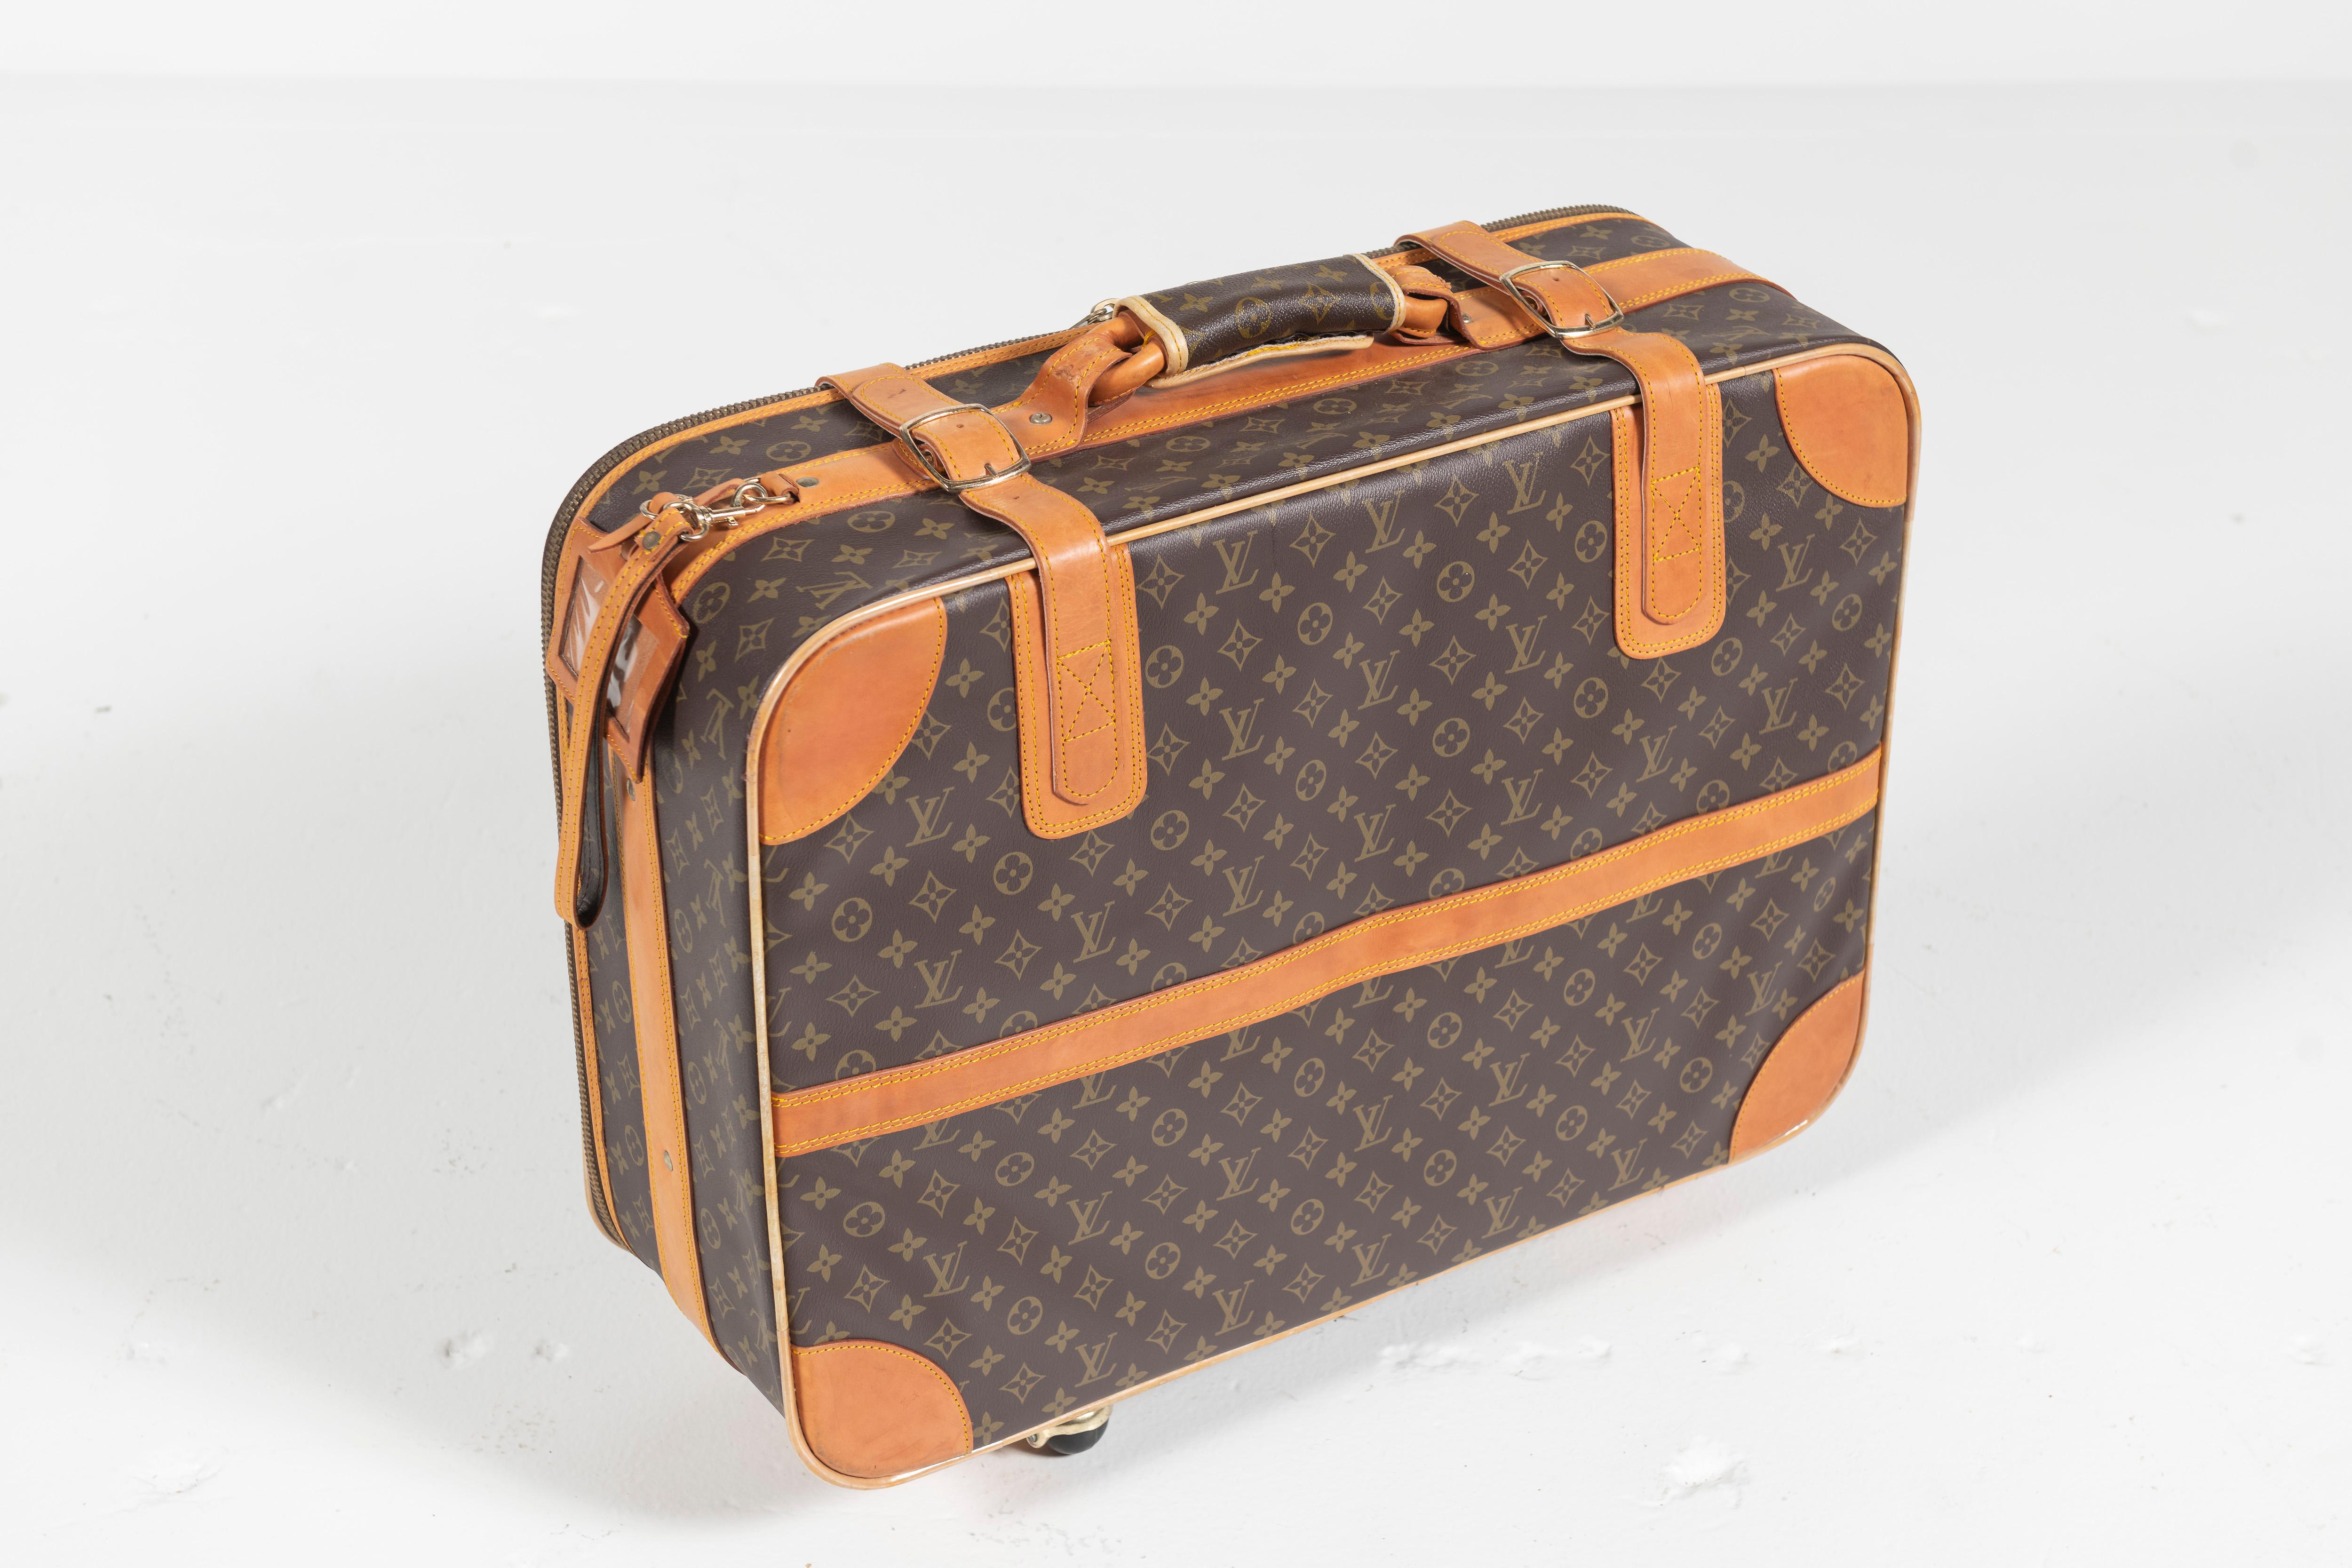 Brass Vintage Louis Vuitton Suitcase, Monogrammed Coated Canvas, Small-Sized For Sale